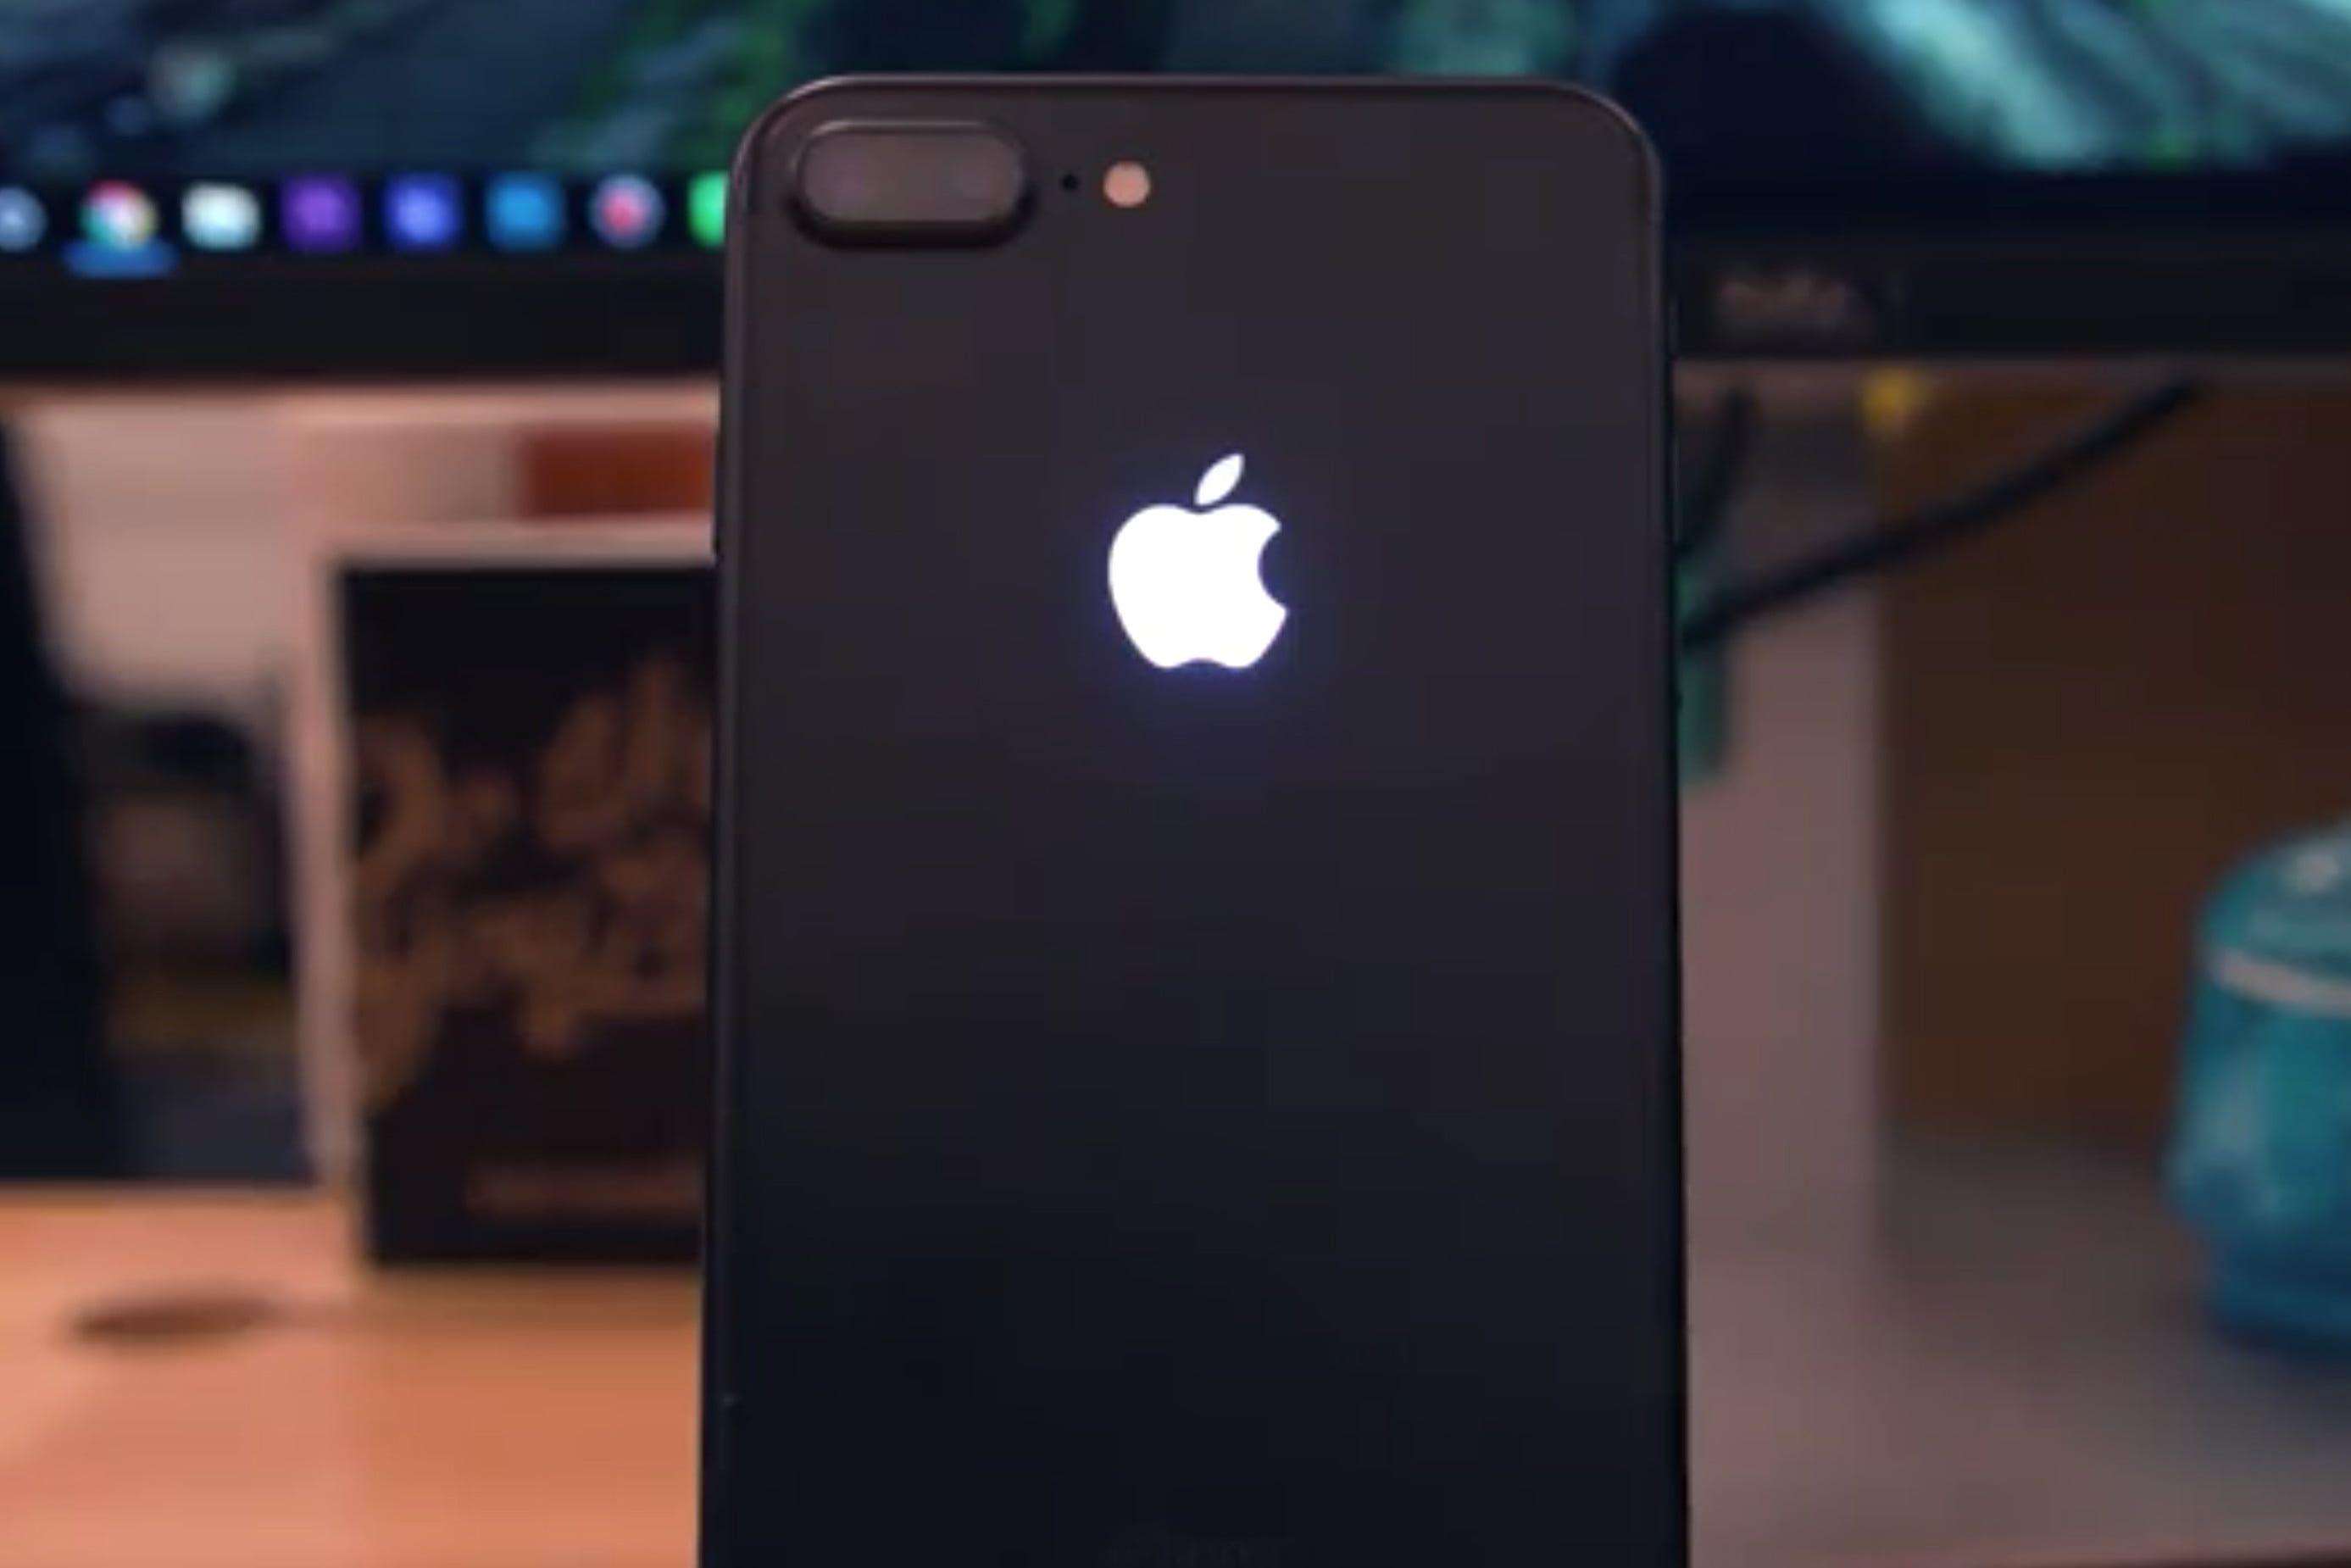 iPhone Apple Logo - How to Make the Apple Logo on an iPhone 7 Light Up | Digital Trends